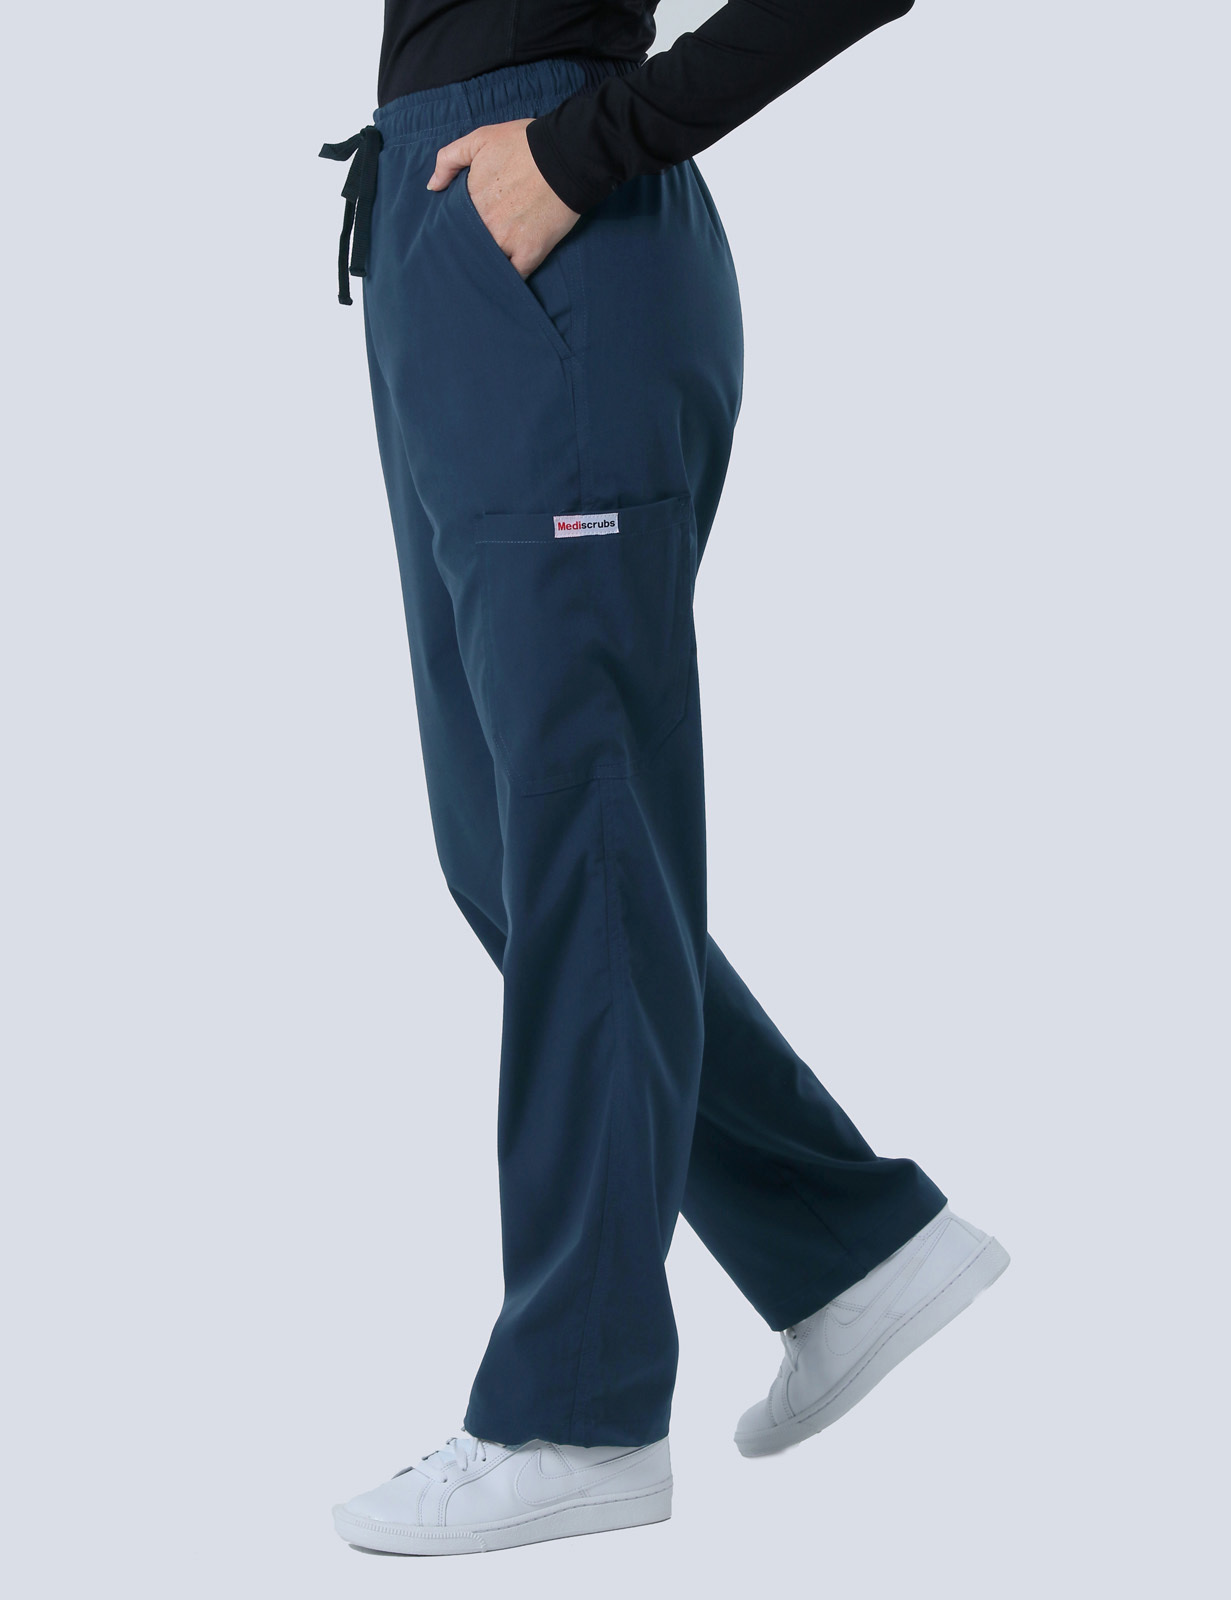 Northern Health - ED Nurse (Women's Fit Spandex Scrub Top and Cargo Pants in Navy incl Logos)